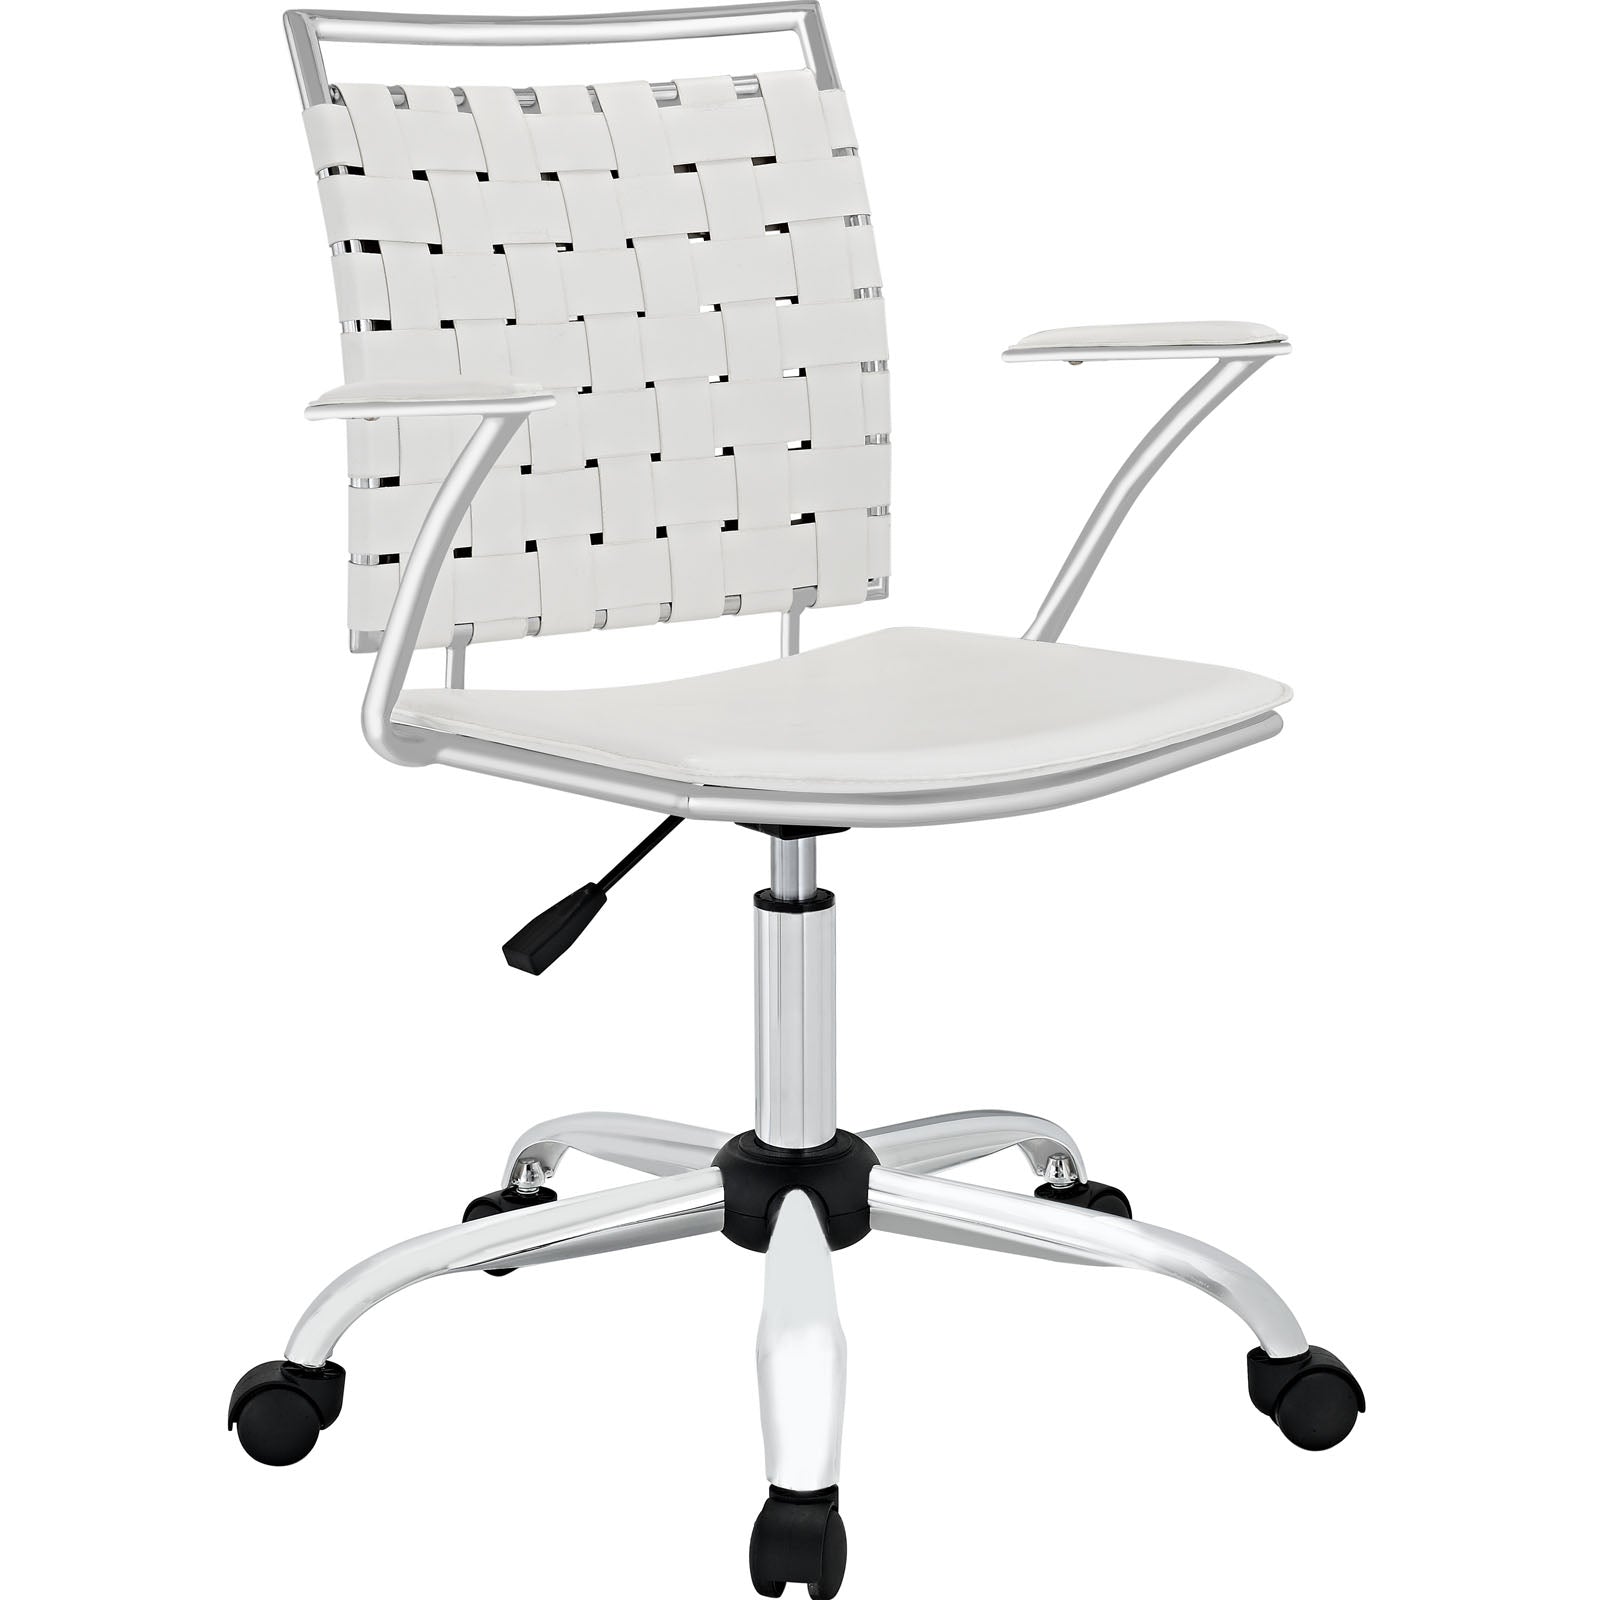 Fuse Office Chair - East Shore Modern Home Furnishings